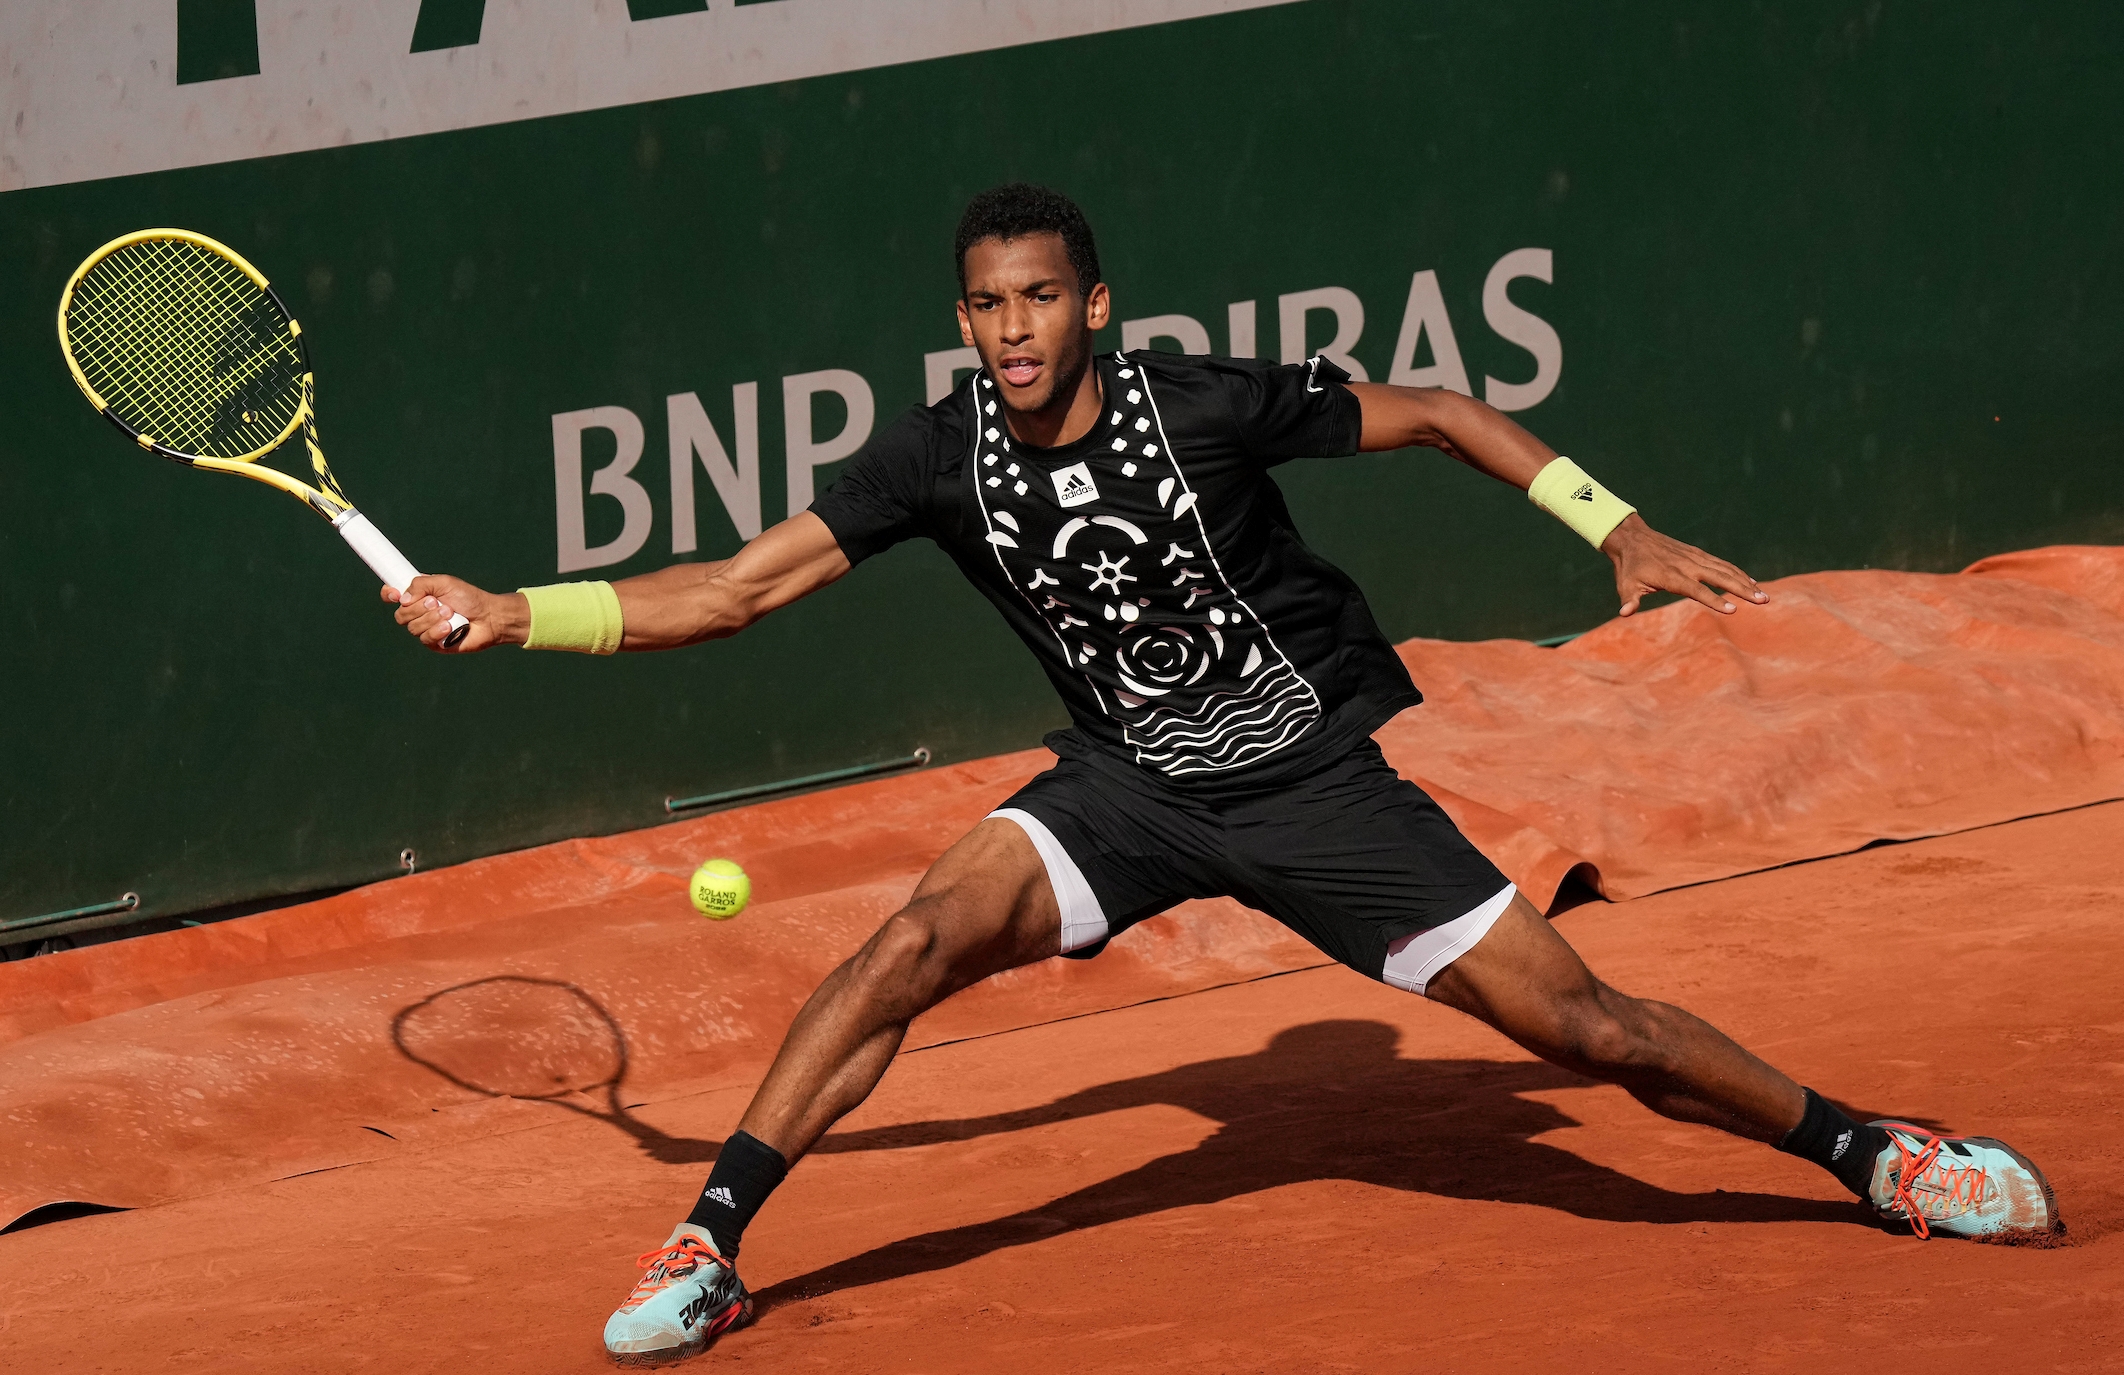 Auger-Aliassime cant hold off Nadal in French Open thriller